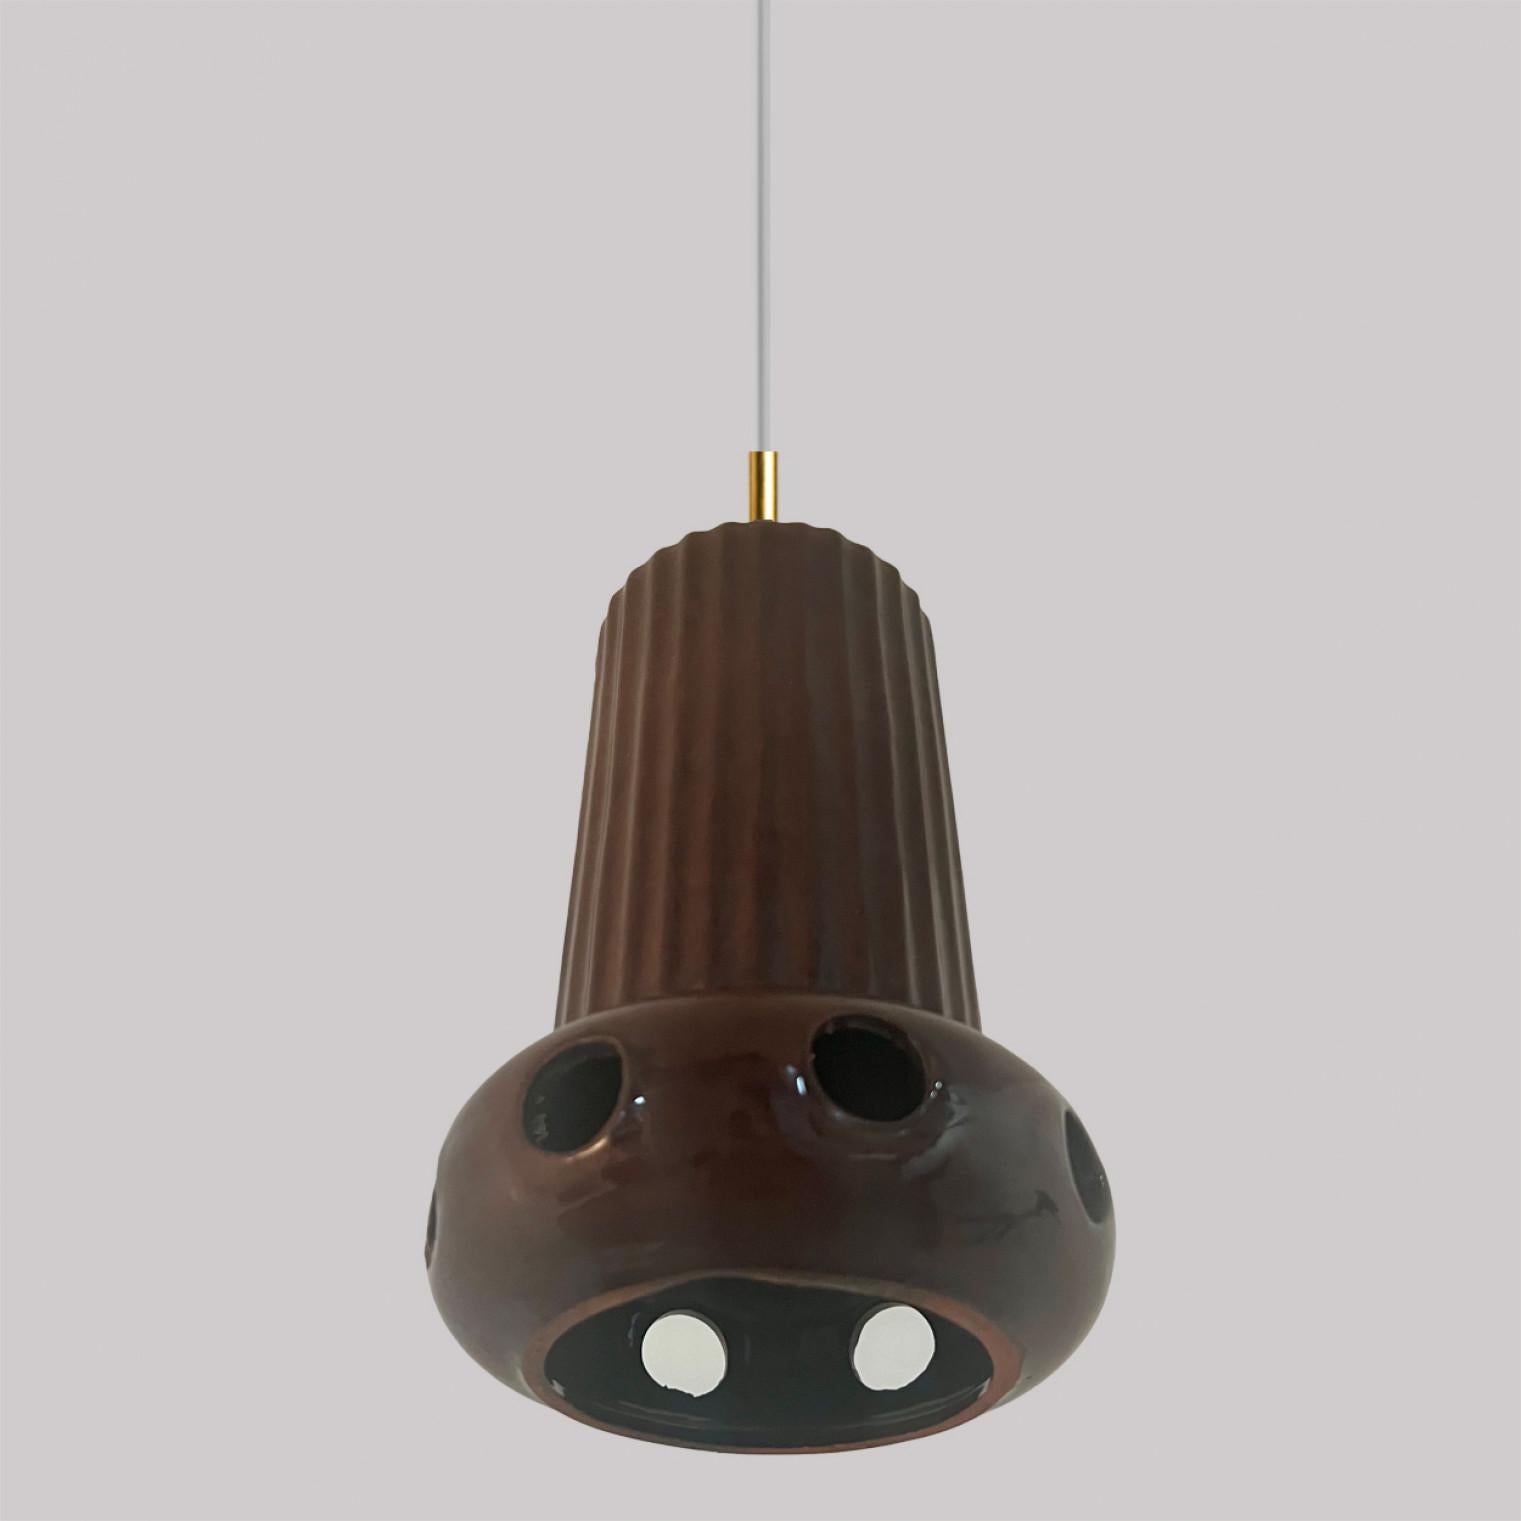 Set of Mixed Brown Glazed Ceramic Pendant Lights, Germany, 1970s In Good Condition For Sale In Rijssen, NL